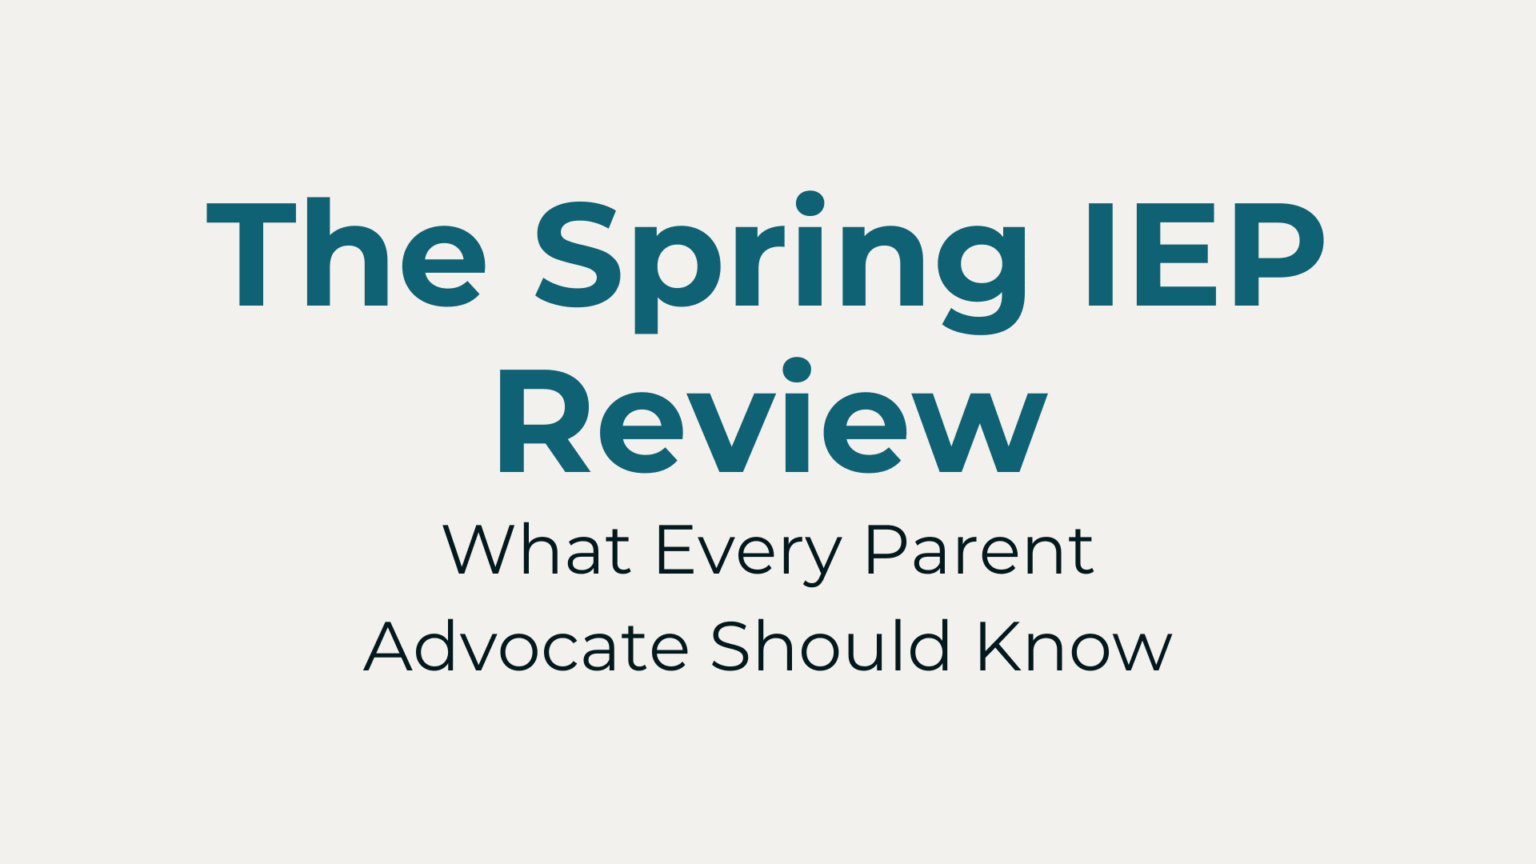 The Spring IEP Review